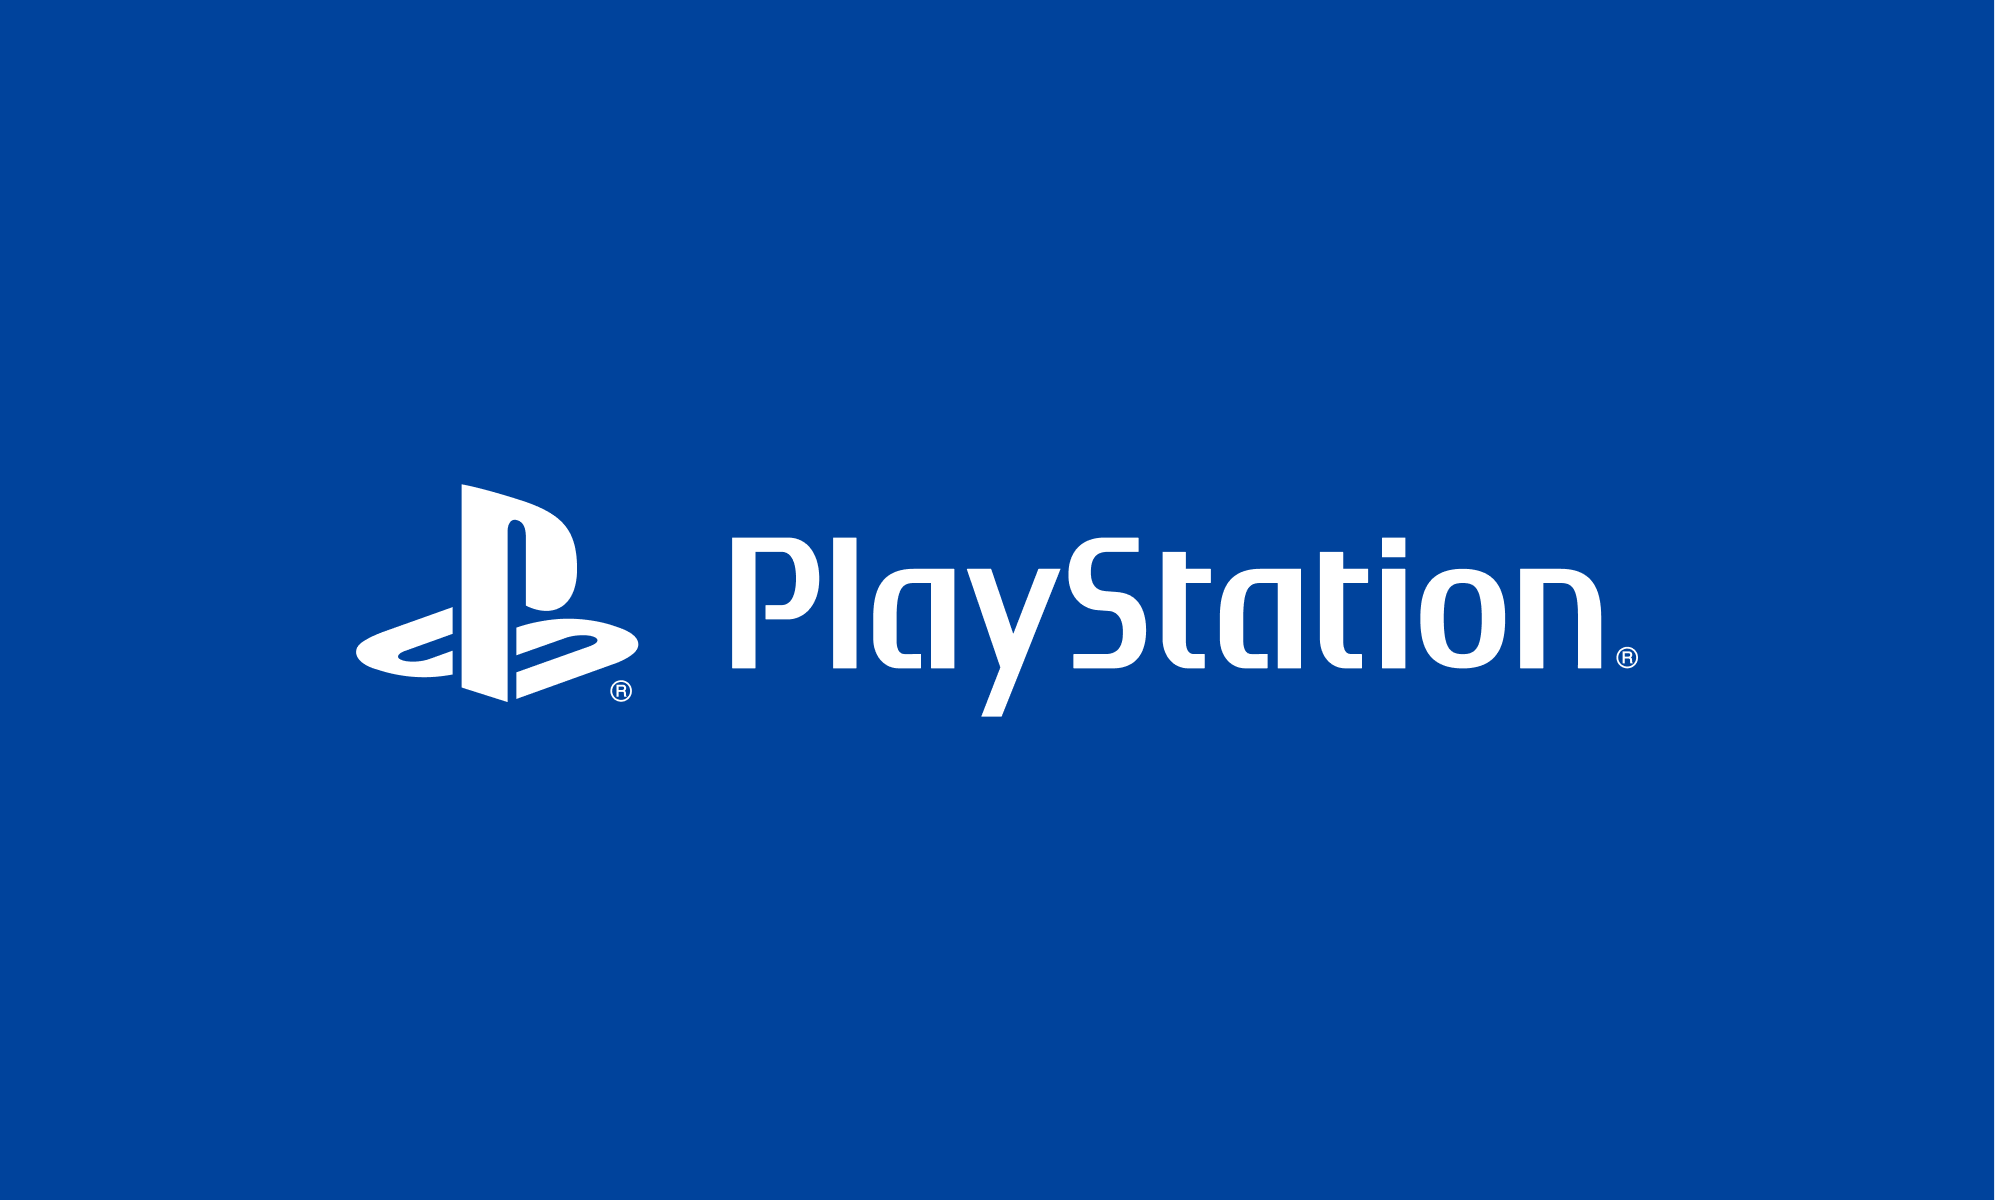 A white PlayStation logo on a rich blue background